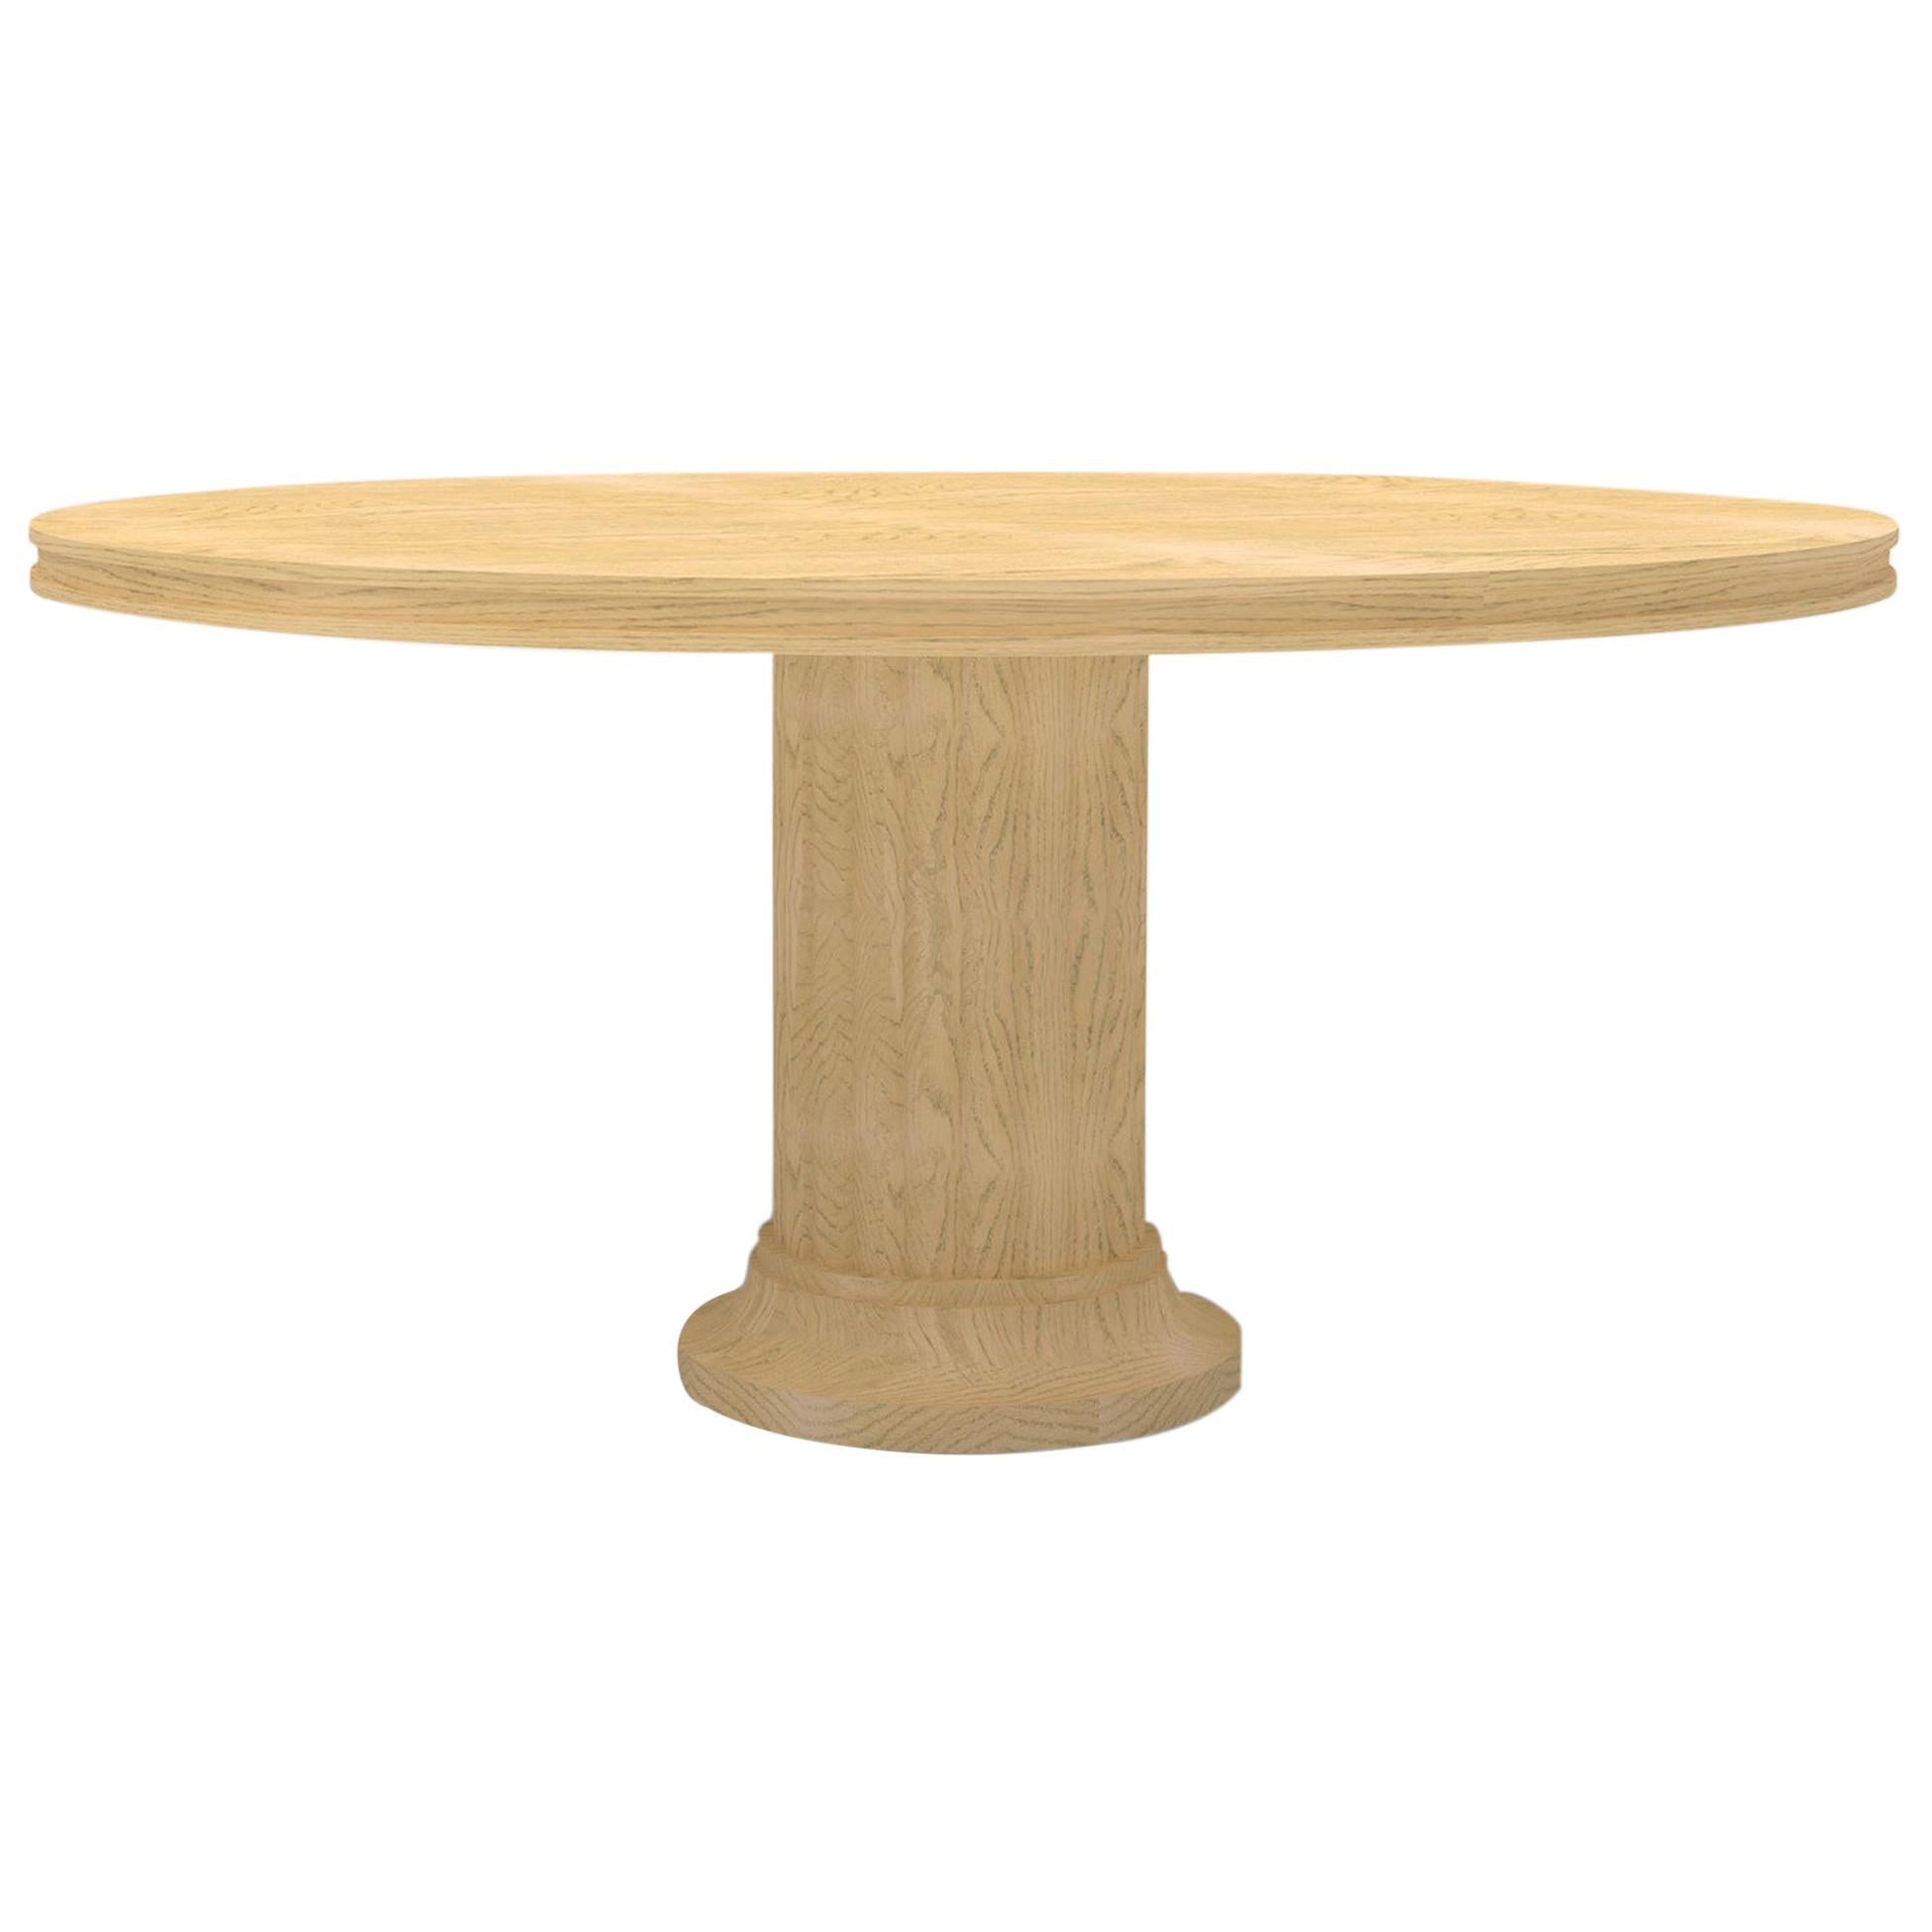 Wood Pedestal Dining Table with Carved Base and Wood Top with Carved Edge